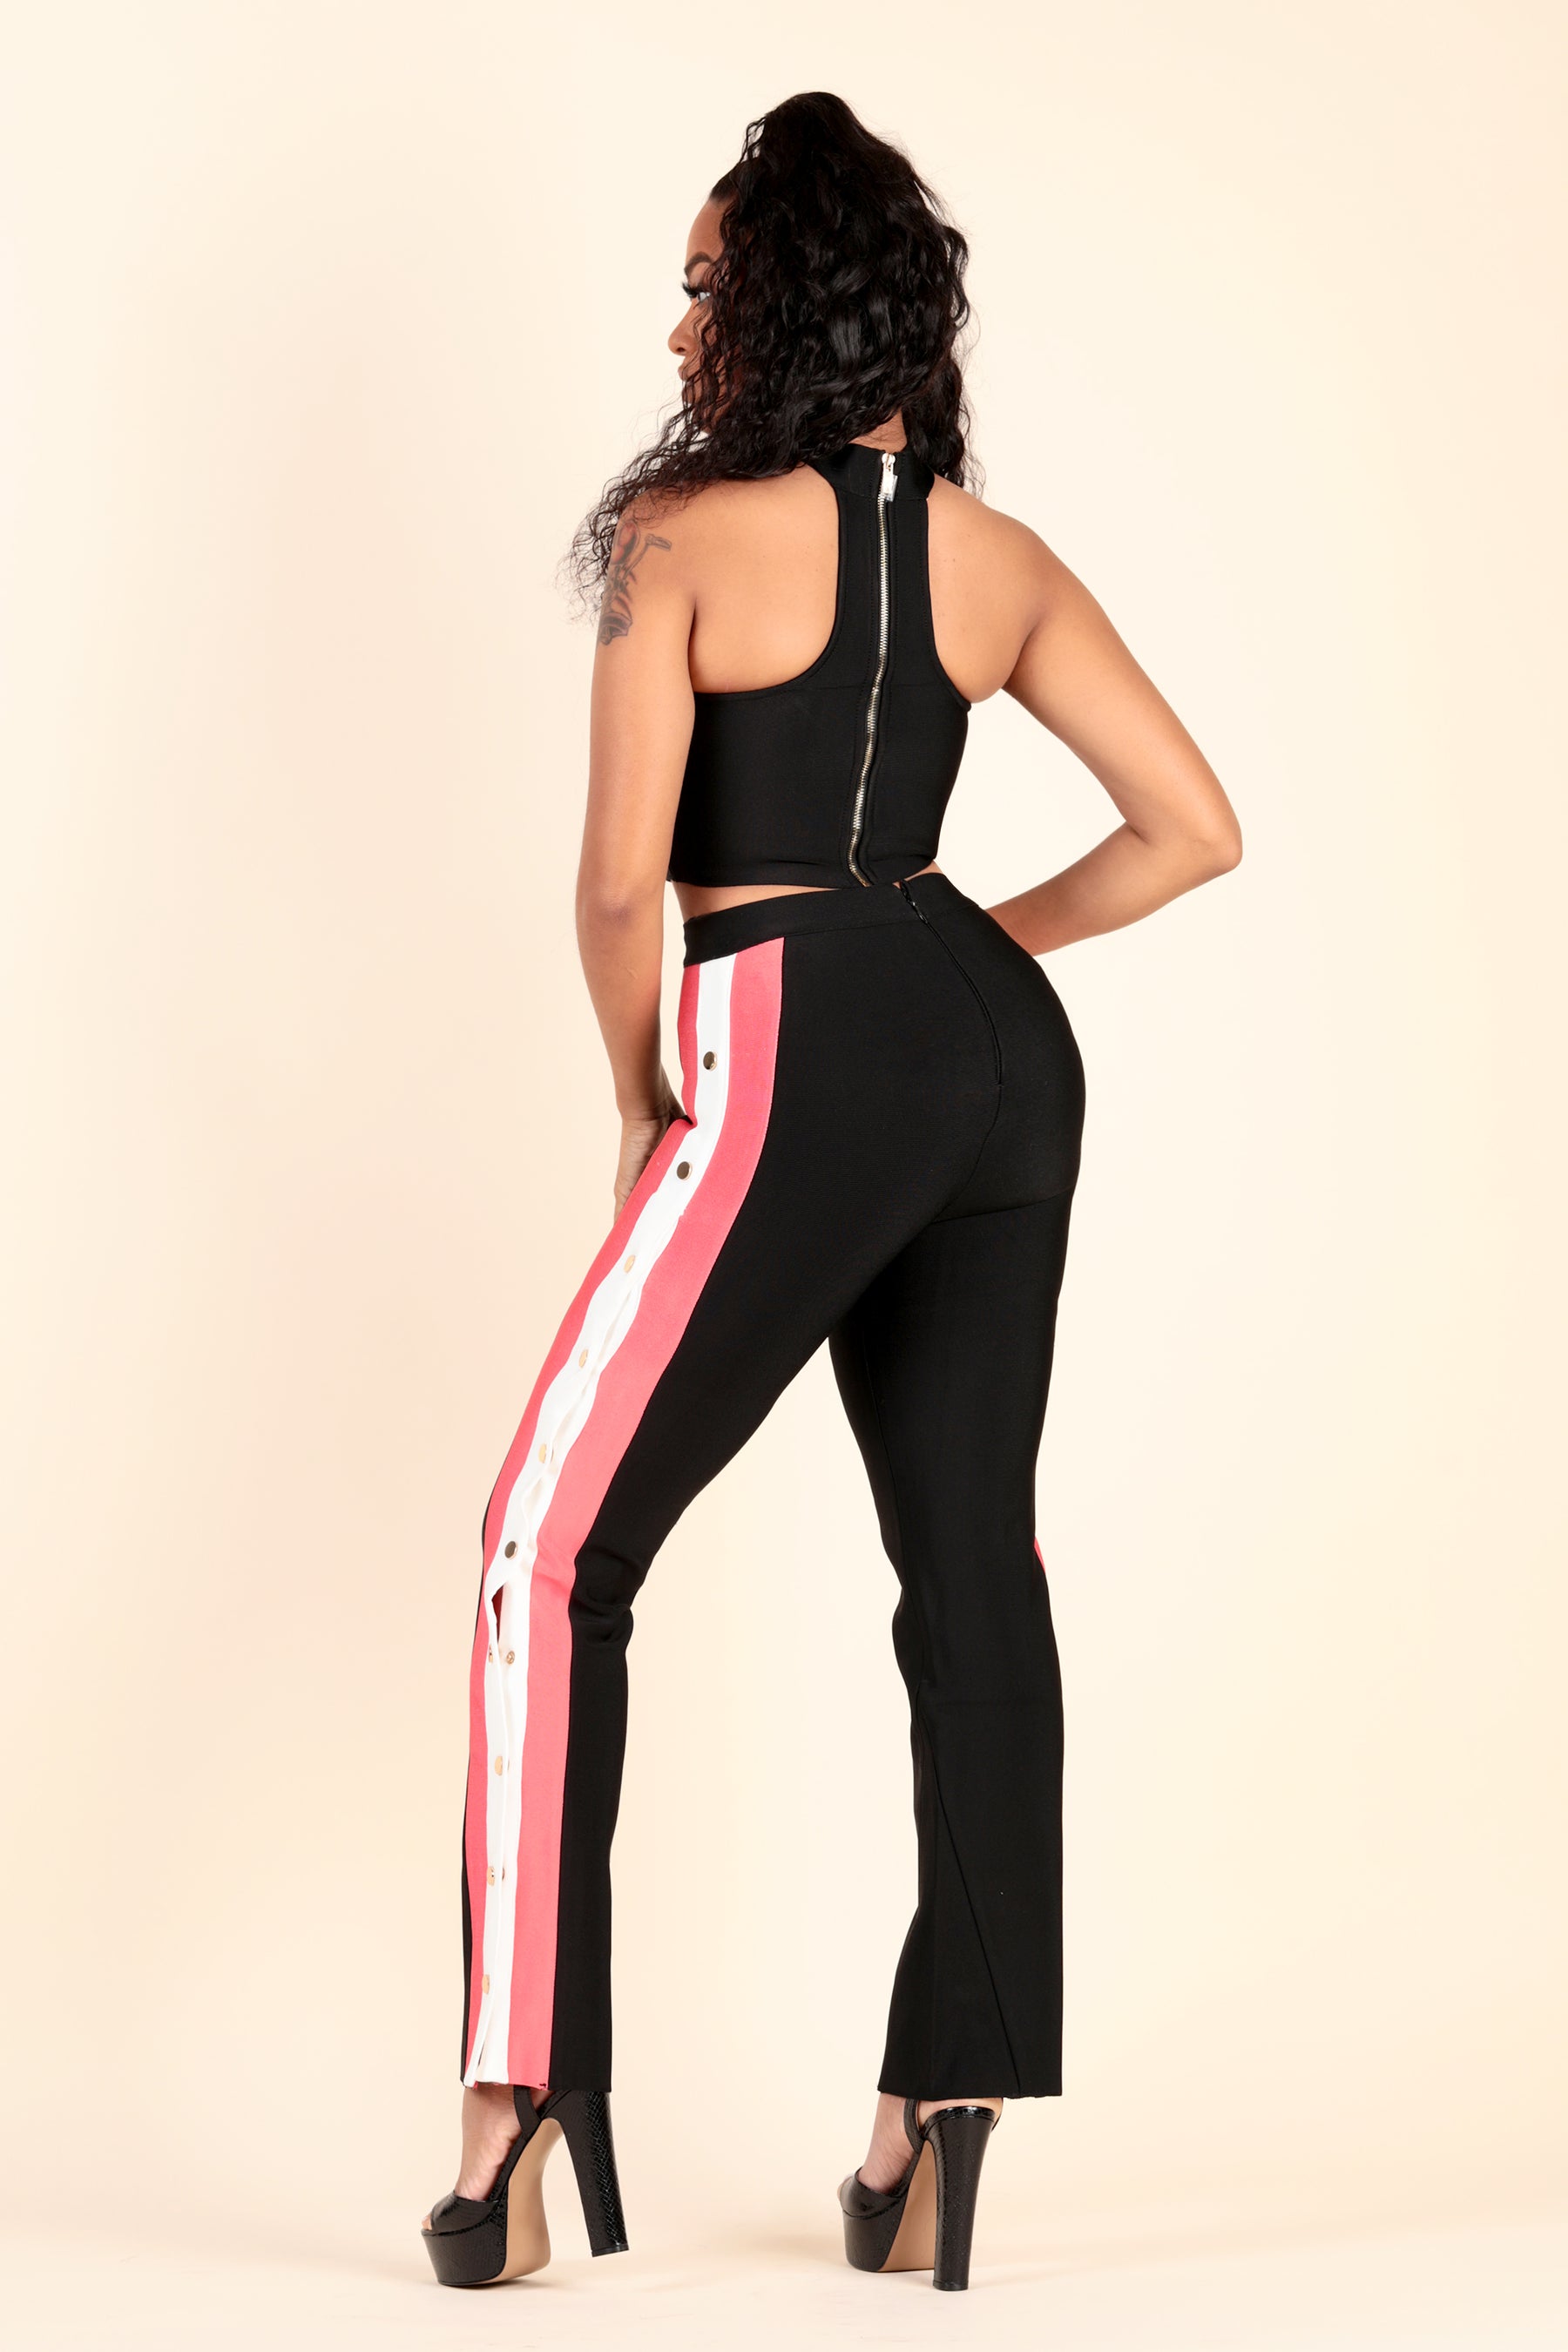 lustruck choker tube top flare striped pant gold snap buttons two piece black cloral white day party night clubbing girls ladies event sporty bandage bodycon fashionnova prettylittlething house of cb missguided forever 21 bebe zipper